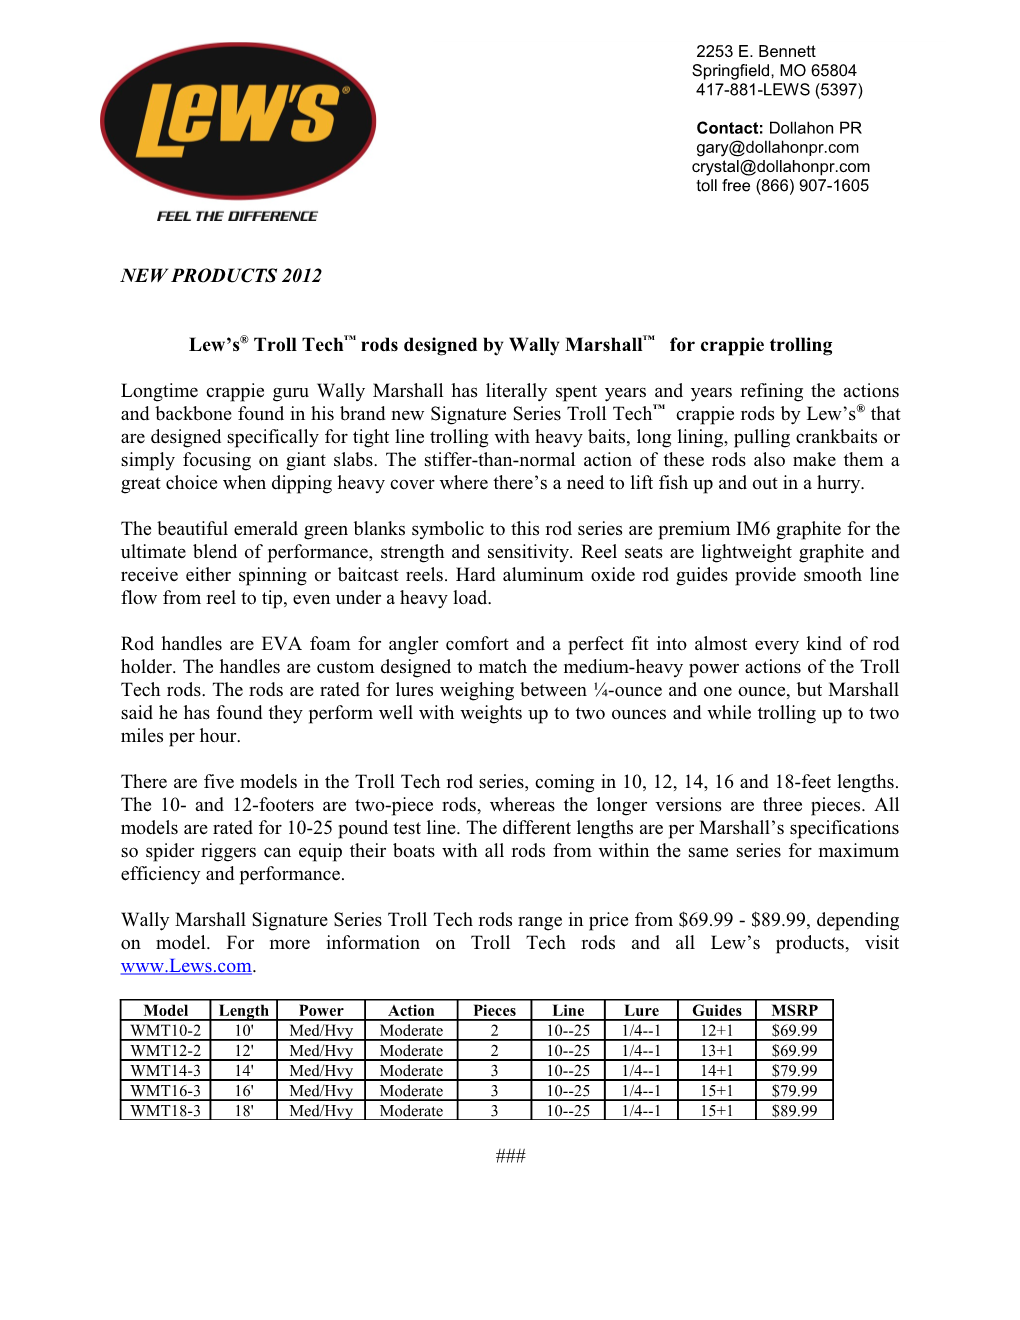 Lew S Troll Tech Rods Designed by Wally Marshall for Crappie Trolling